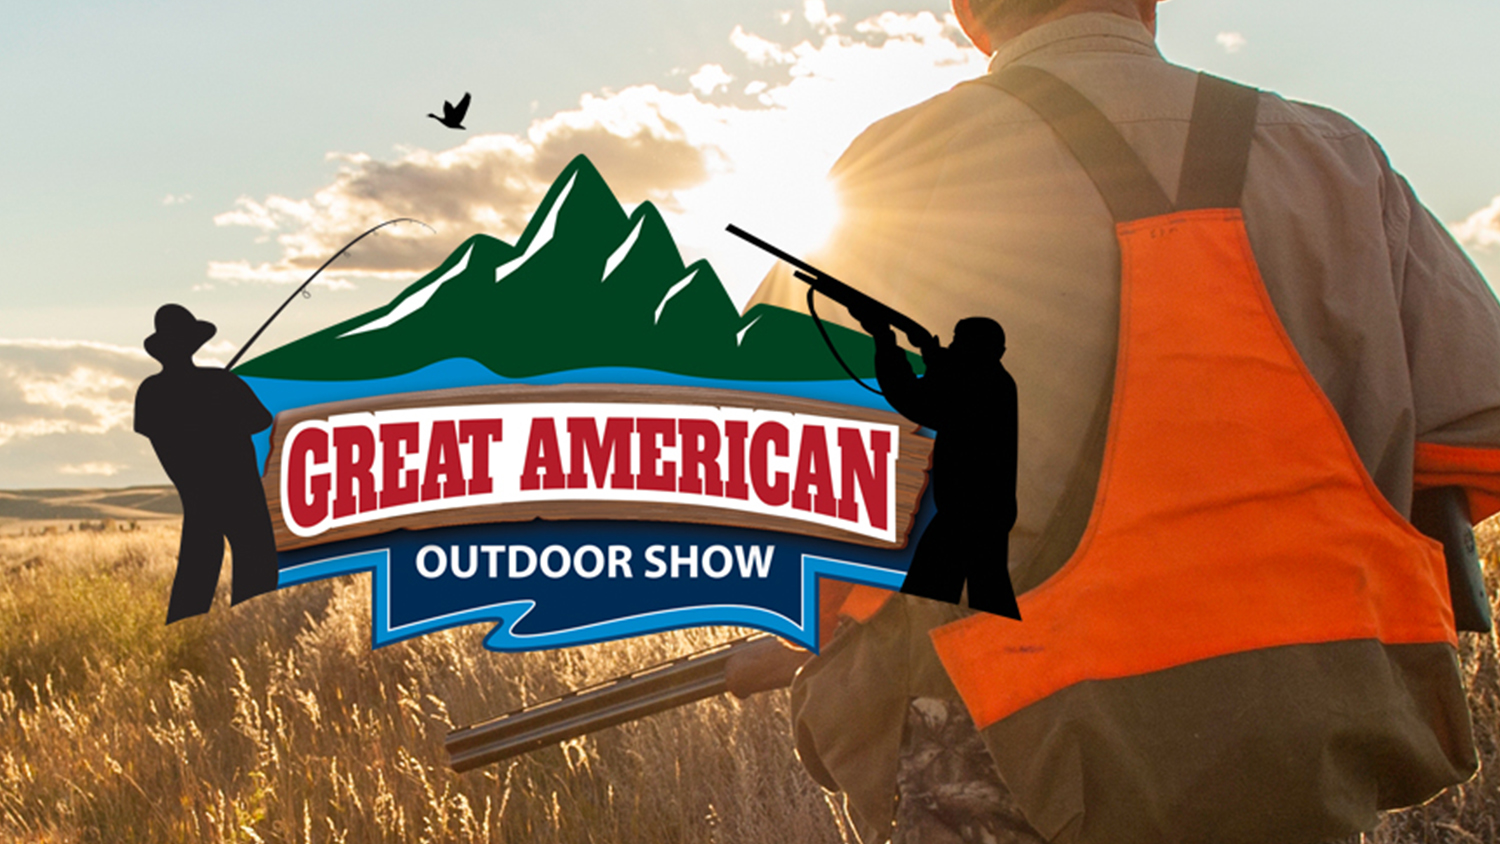 Great American Outdoor Show Events for Saturday February 13